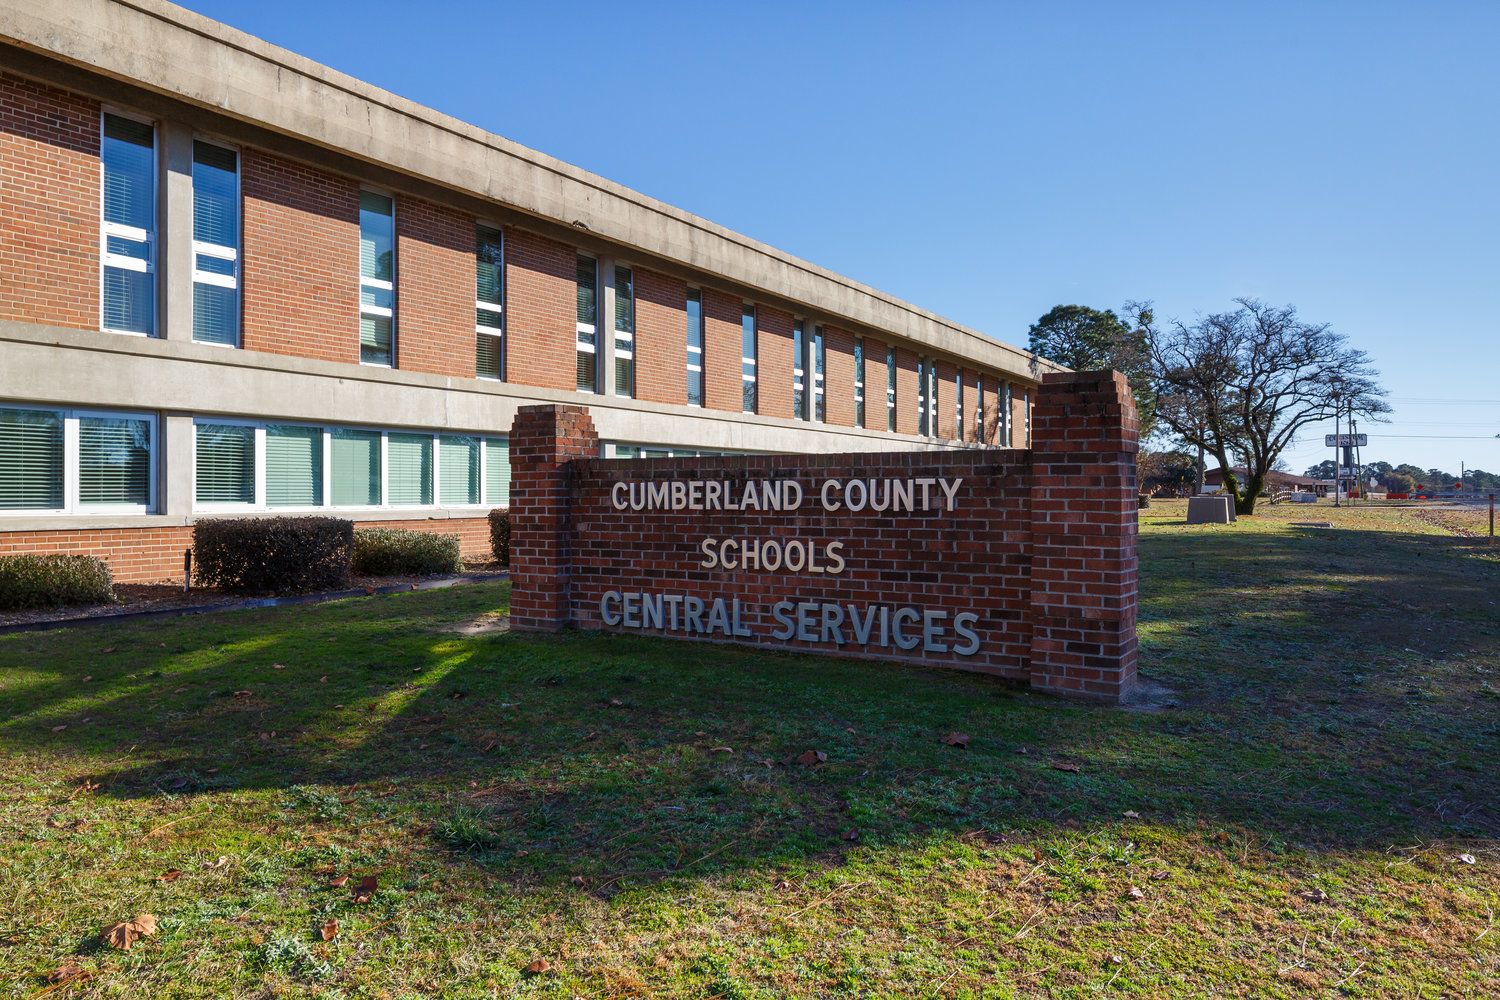 Cumberland County employs licensed therapists at some high schools, but some experts say there is more the school system could do to prevent student suicide.